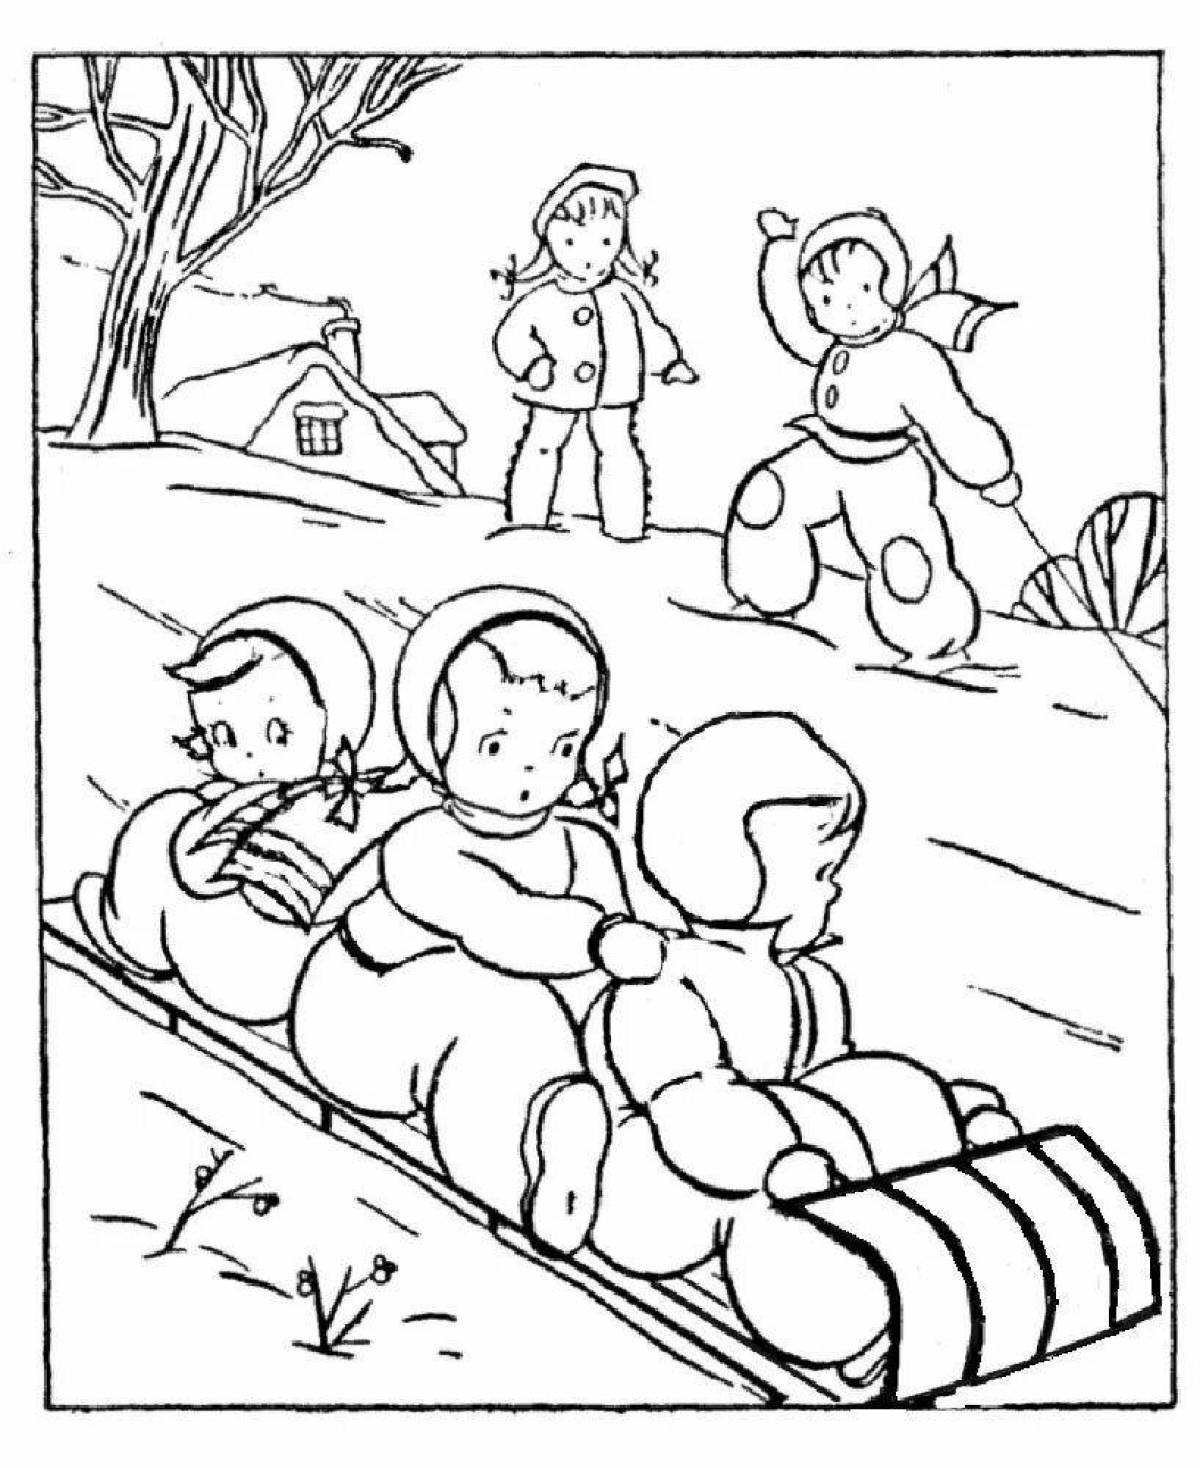 Serendipitous coloring book children on a hill in winter